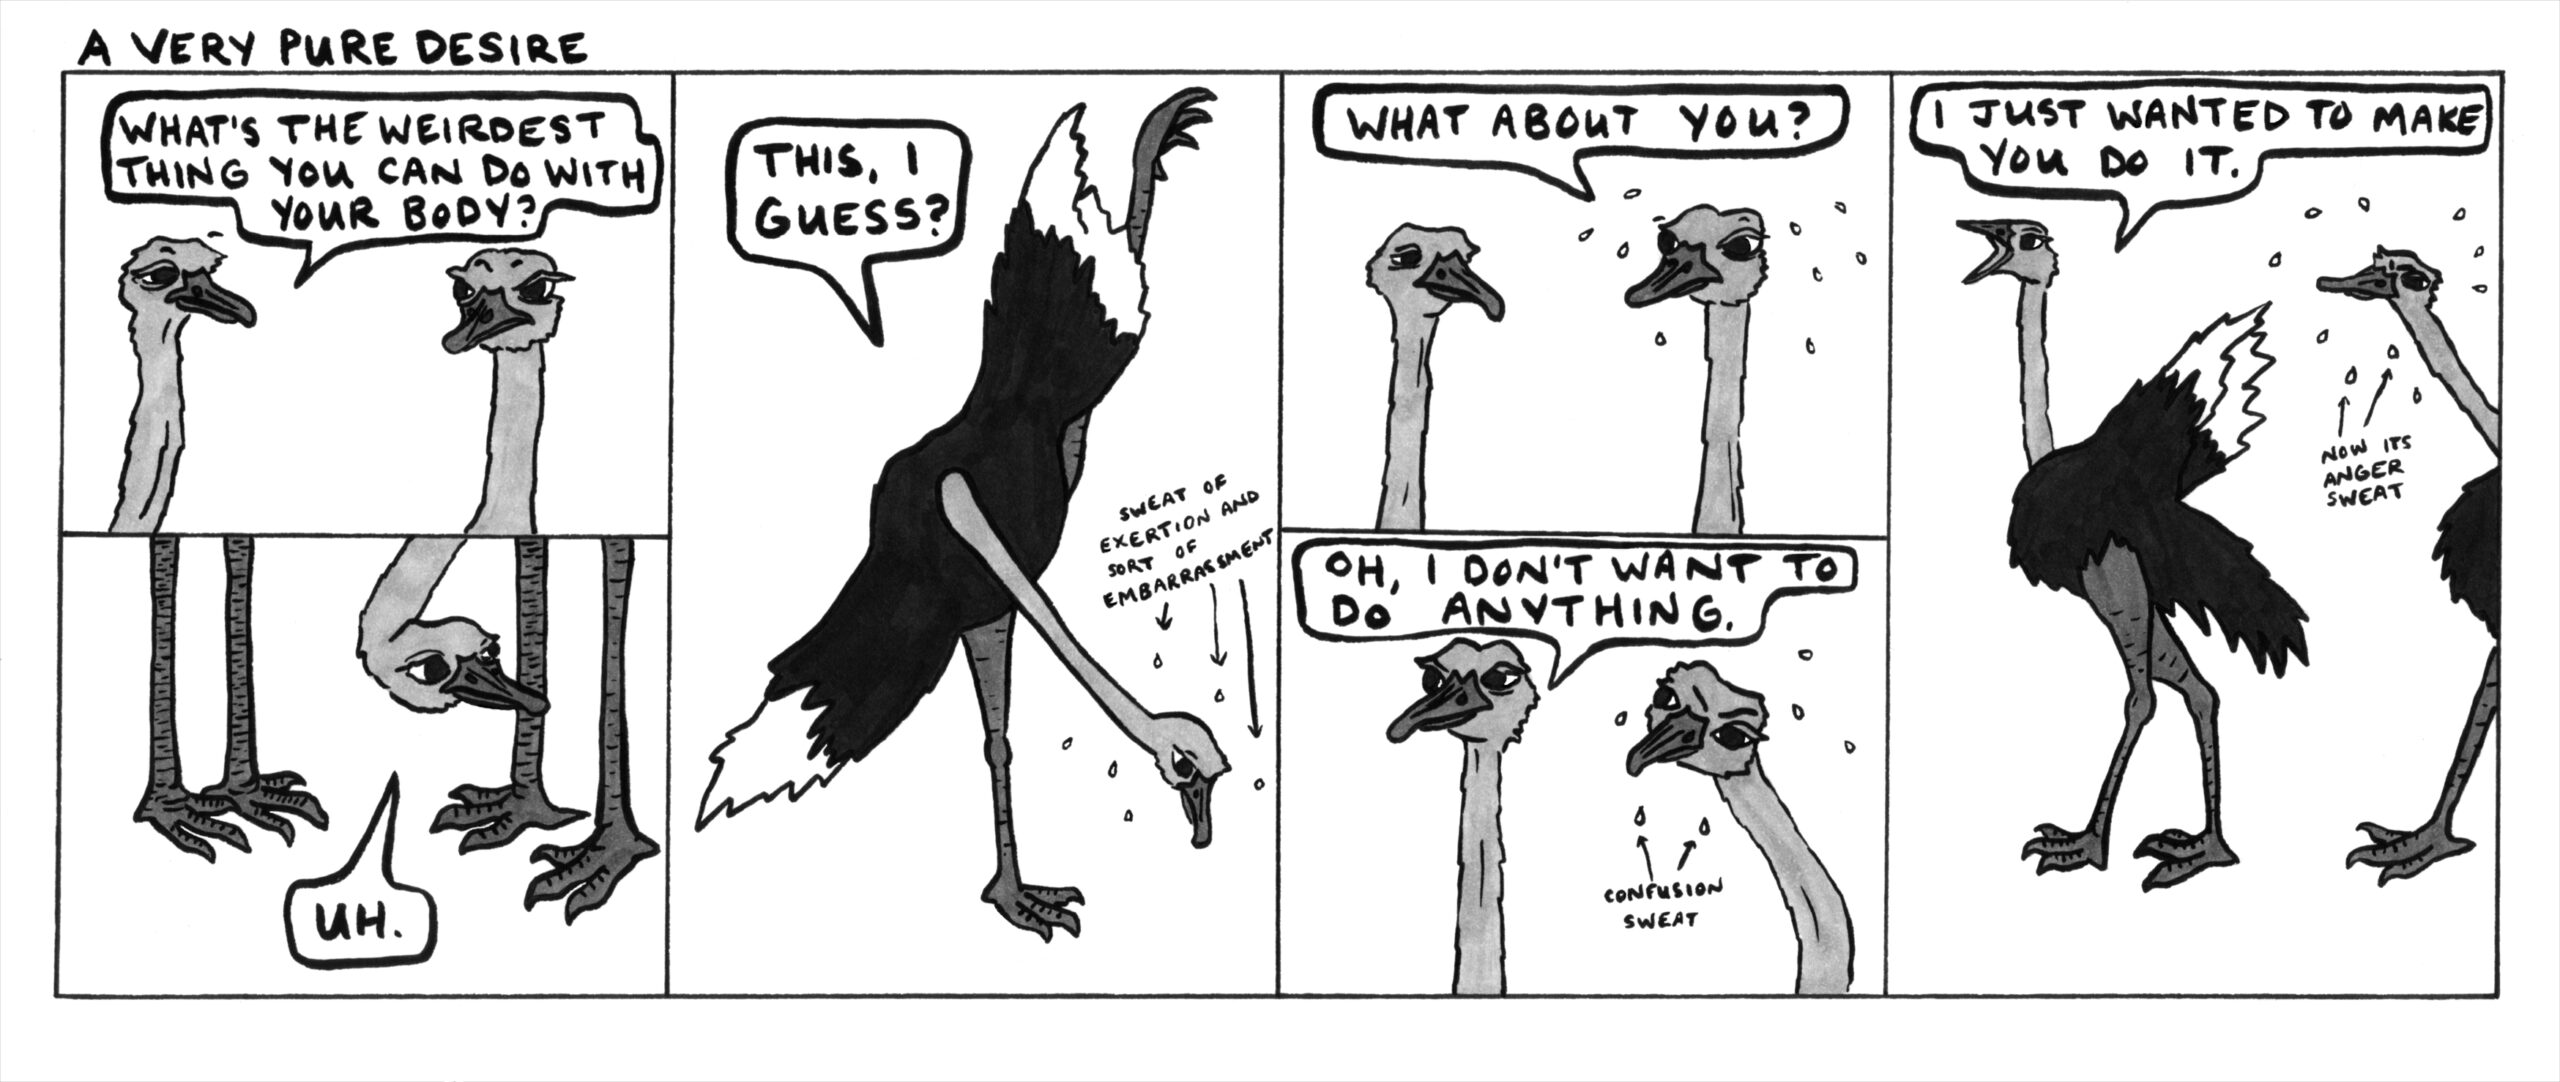 Dave wanted me to draw a road runner this week but I think ostriches are funnier for this particular concept